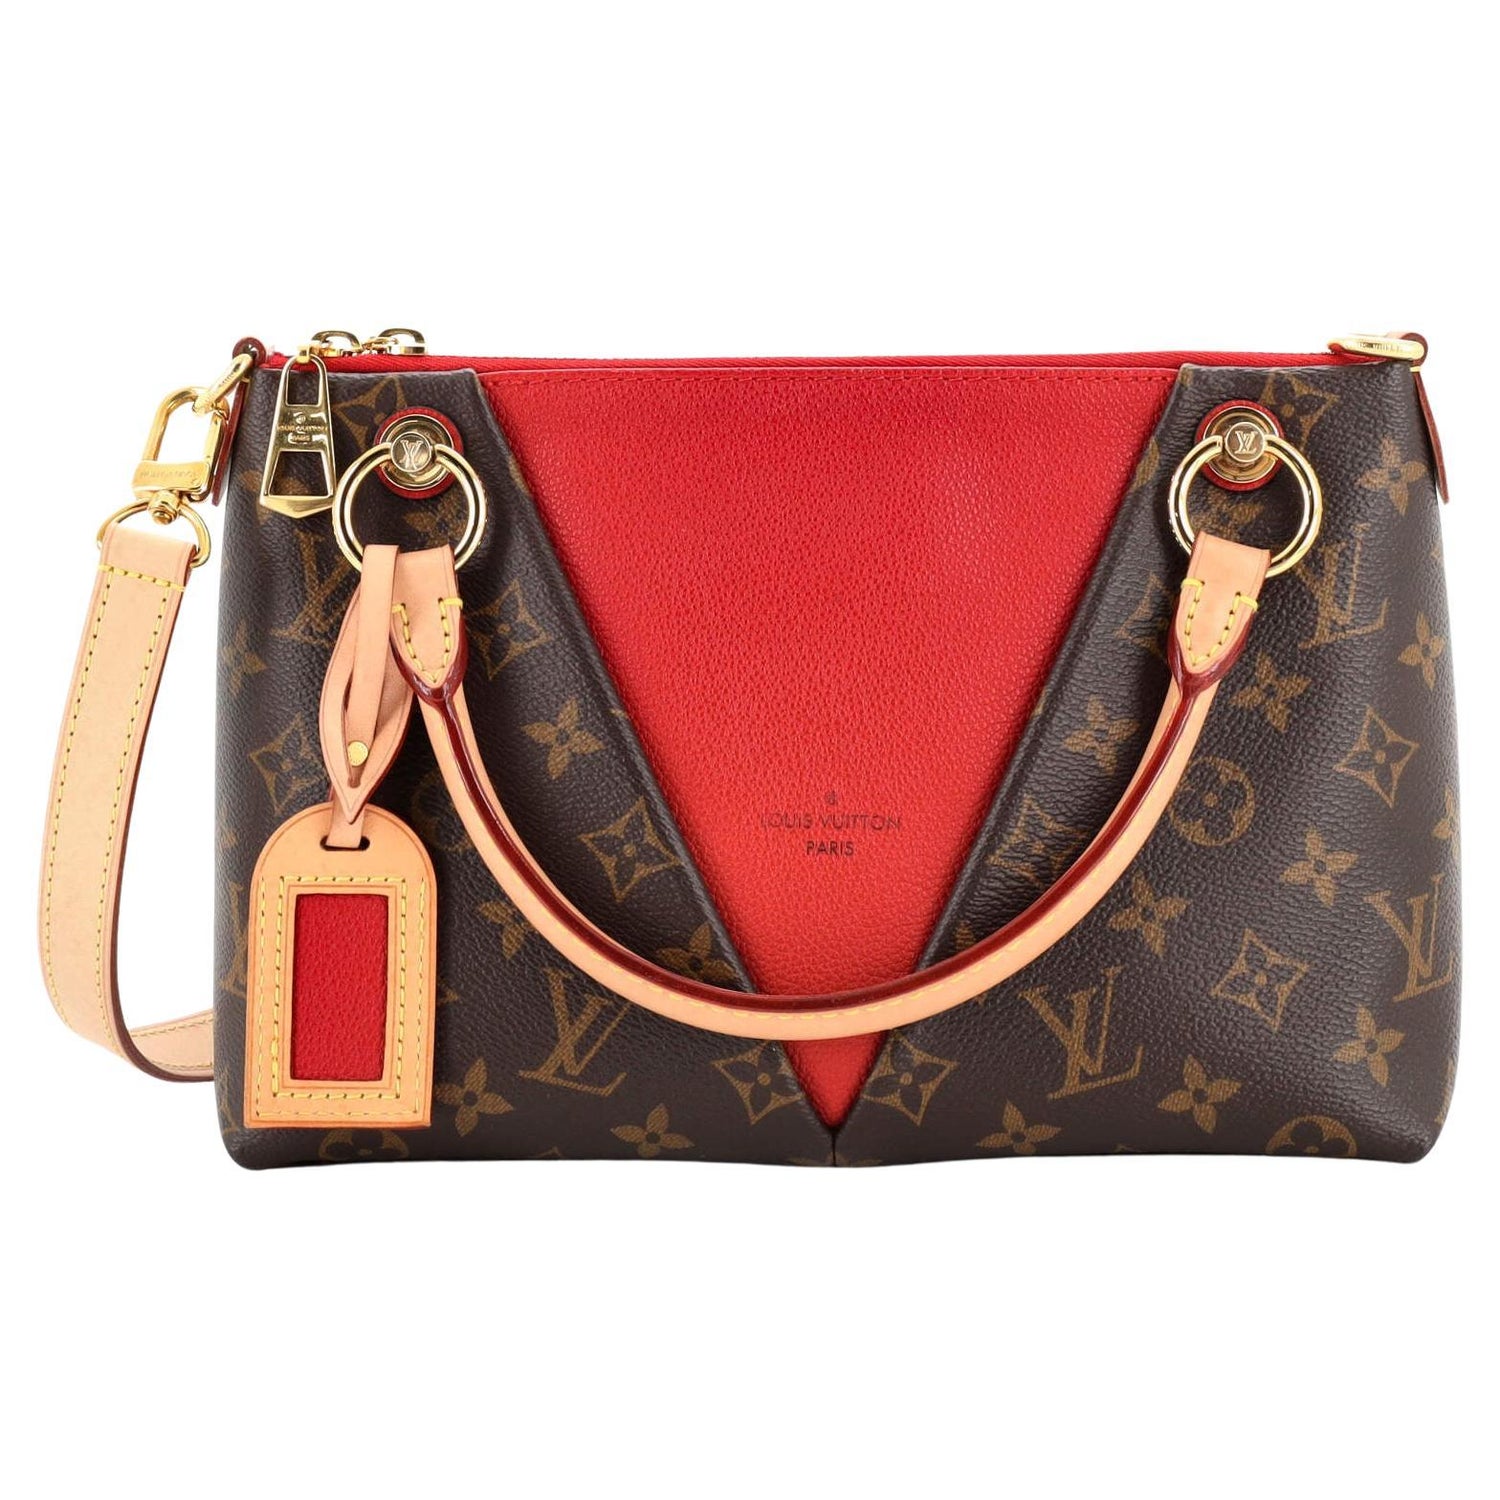 Louis Vuitton V Tote Bb - 2 For Sale on 1stDibs